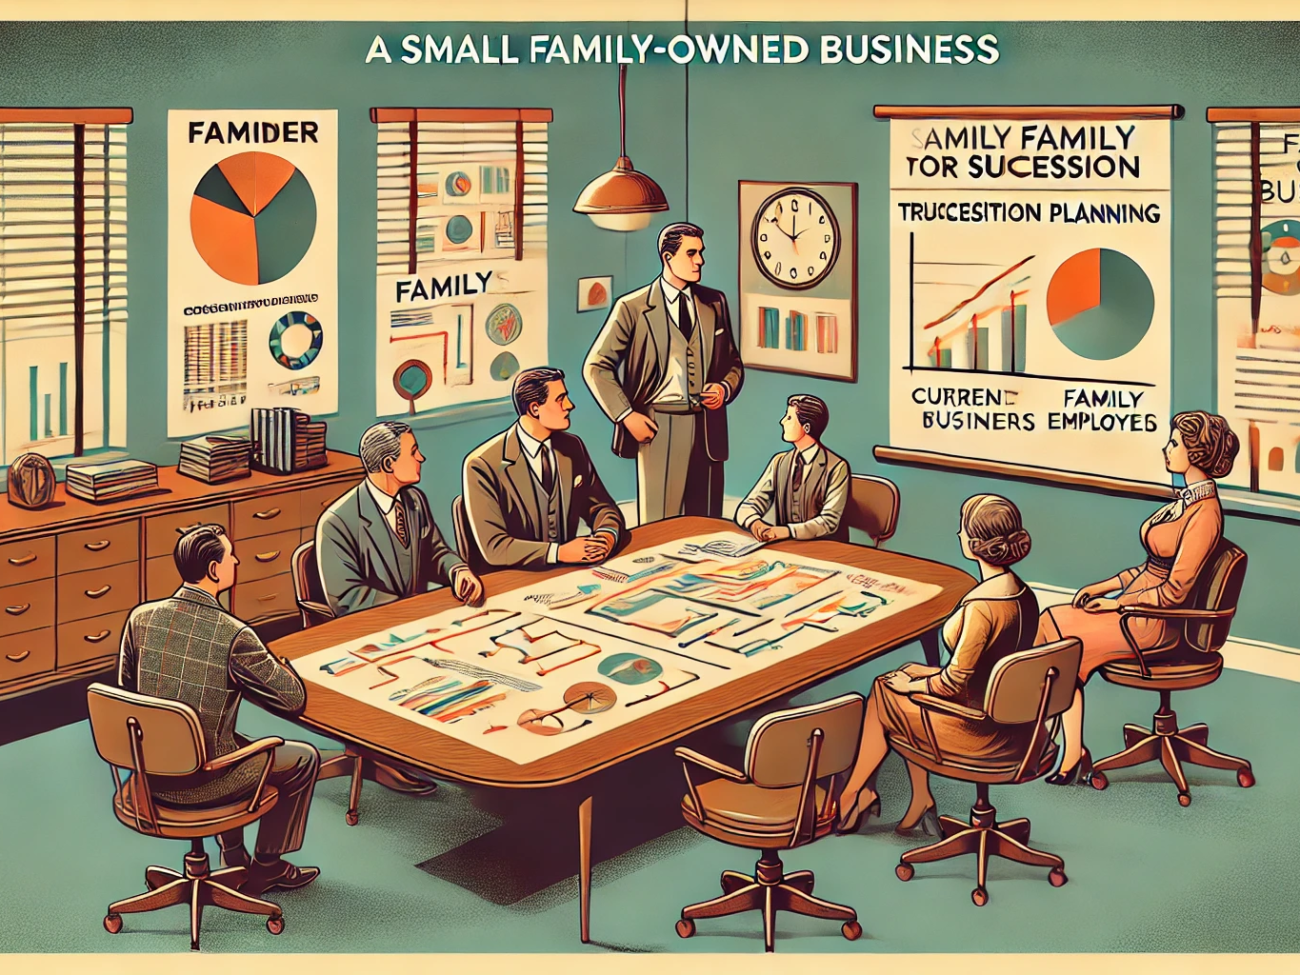 DALL·E 2024-06-28 15.28.18 - A 1960s-themed wide illustration showing a small family-owned business planning for succession. The scene includes a retro office with vintage furnitu